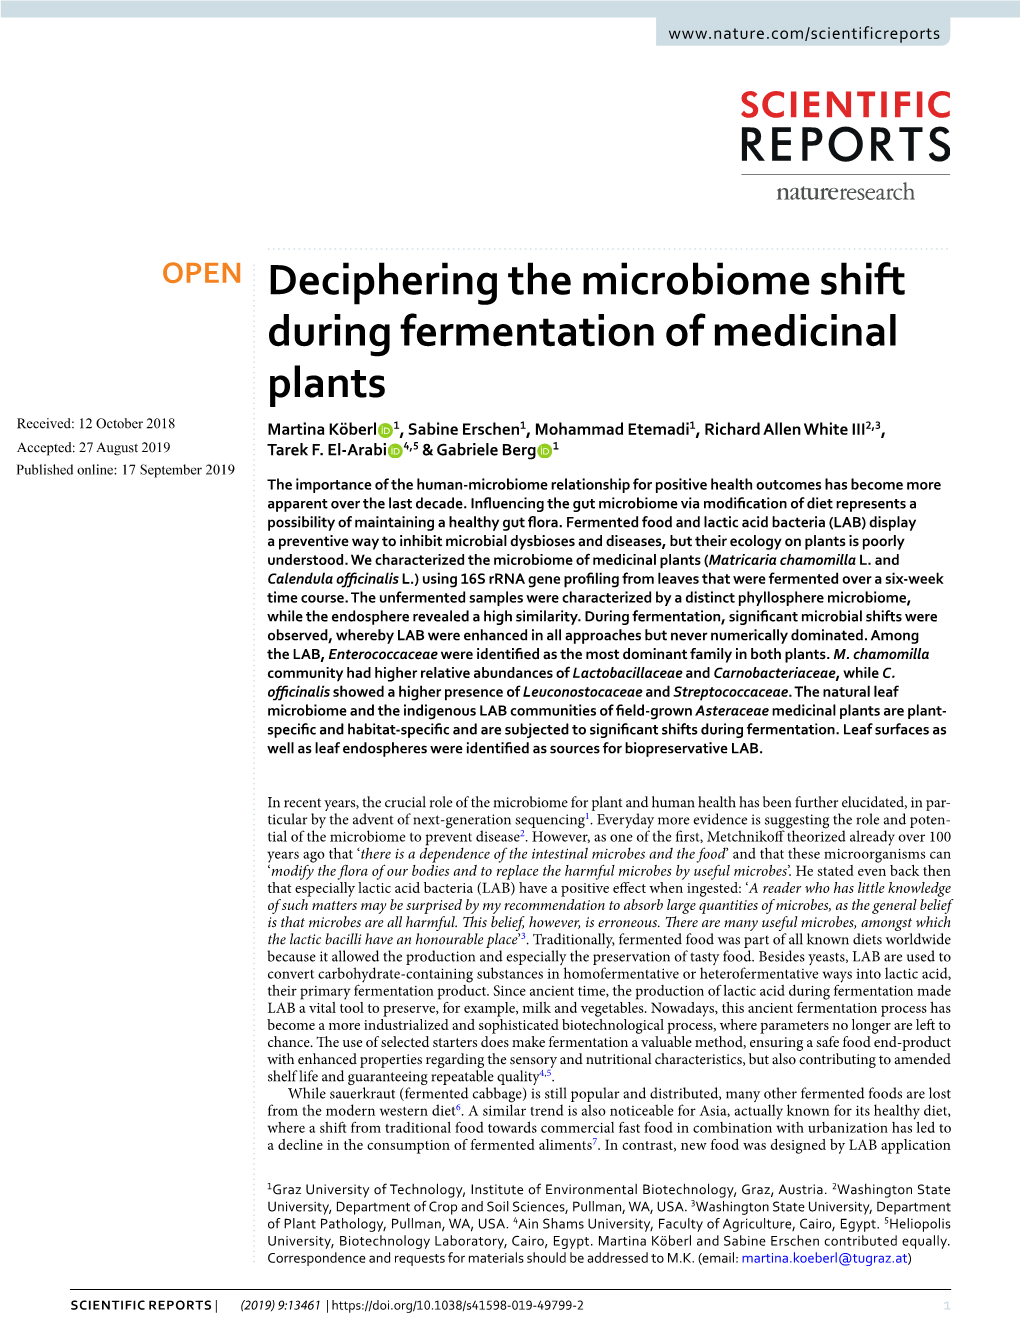 Deciphering the Microbiome Shift During Fermentation of Medicinal